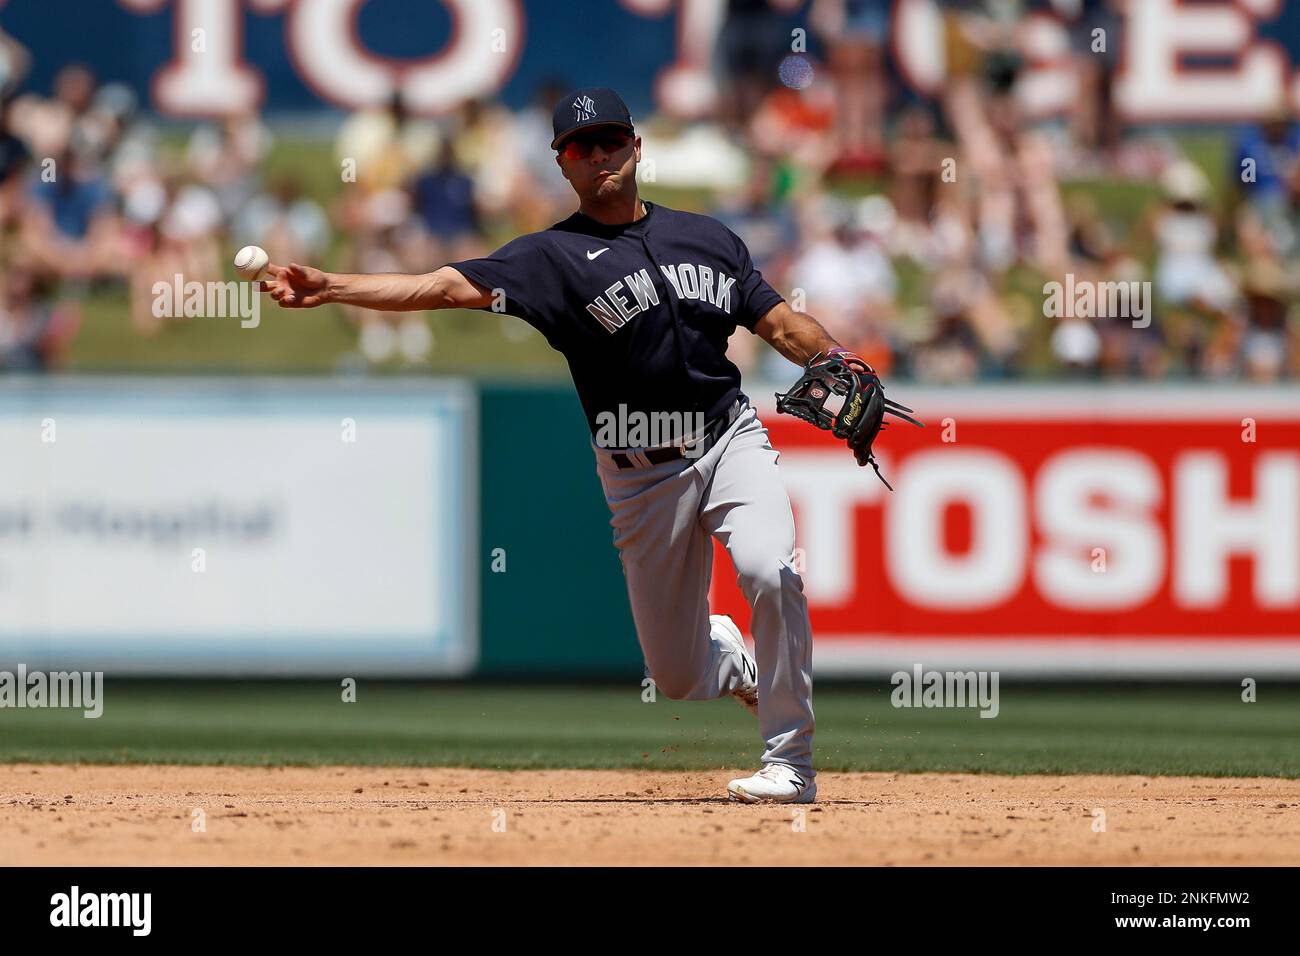 LAKELAND, FL - MARCH 28: New York Yankees shortstop Isiah Kiner-Falefa (12)  throws the ball during a Spring Training Baseball game between the Detroit  Tigers and New York Yankees on March 28